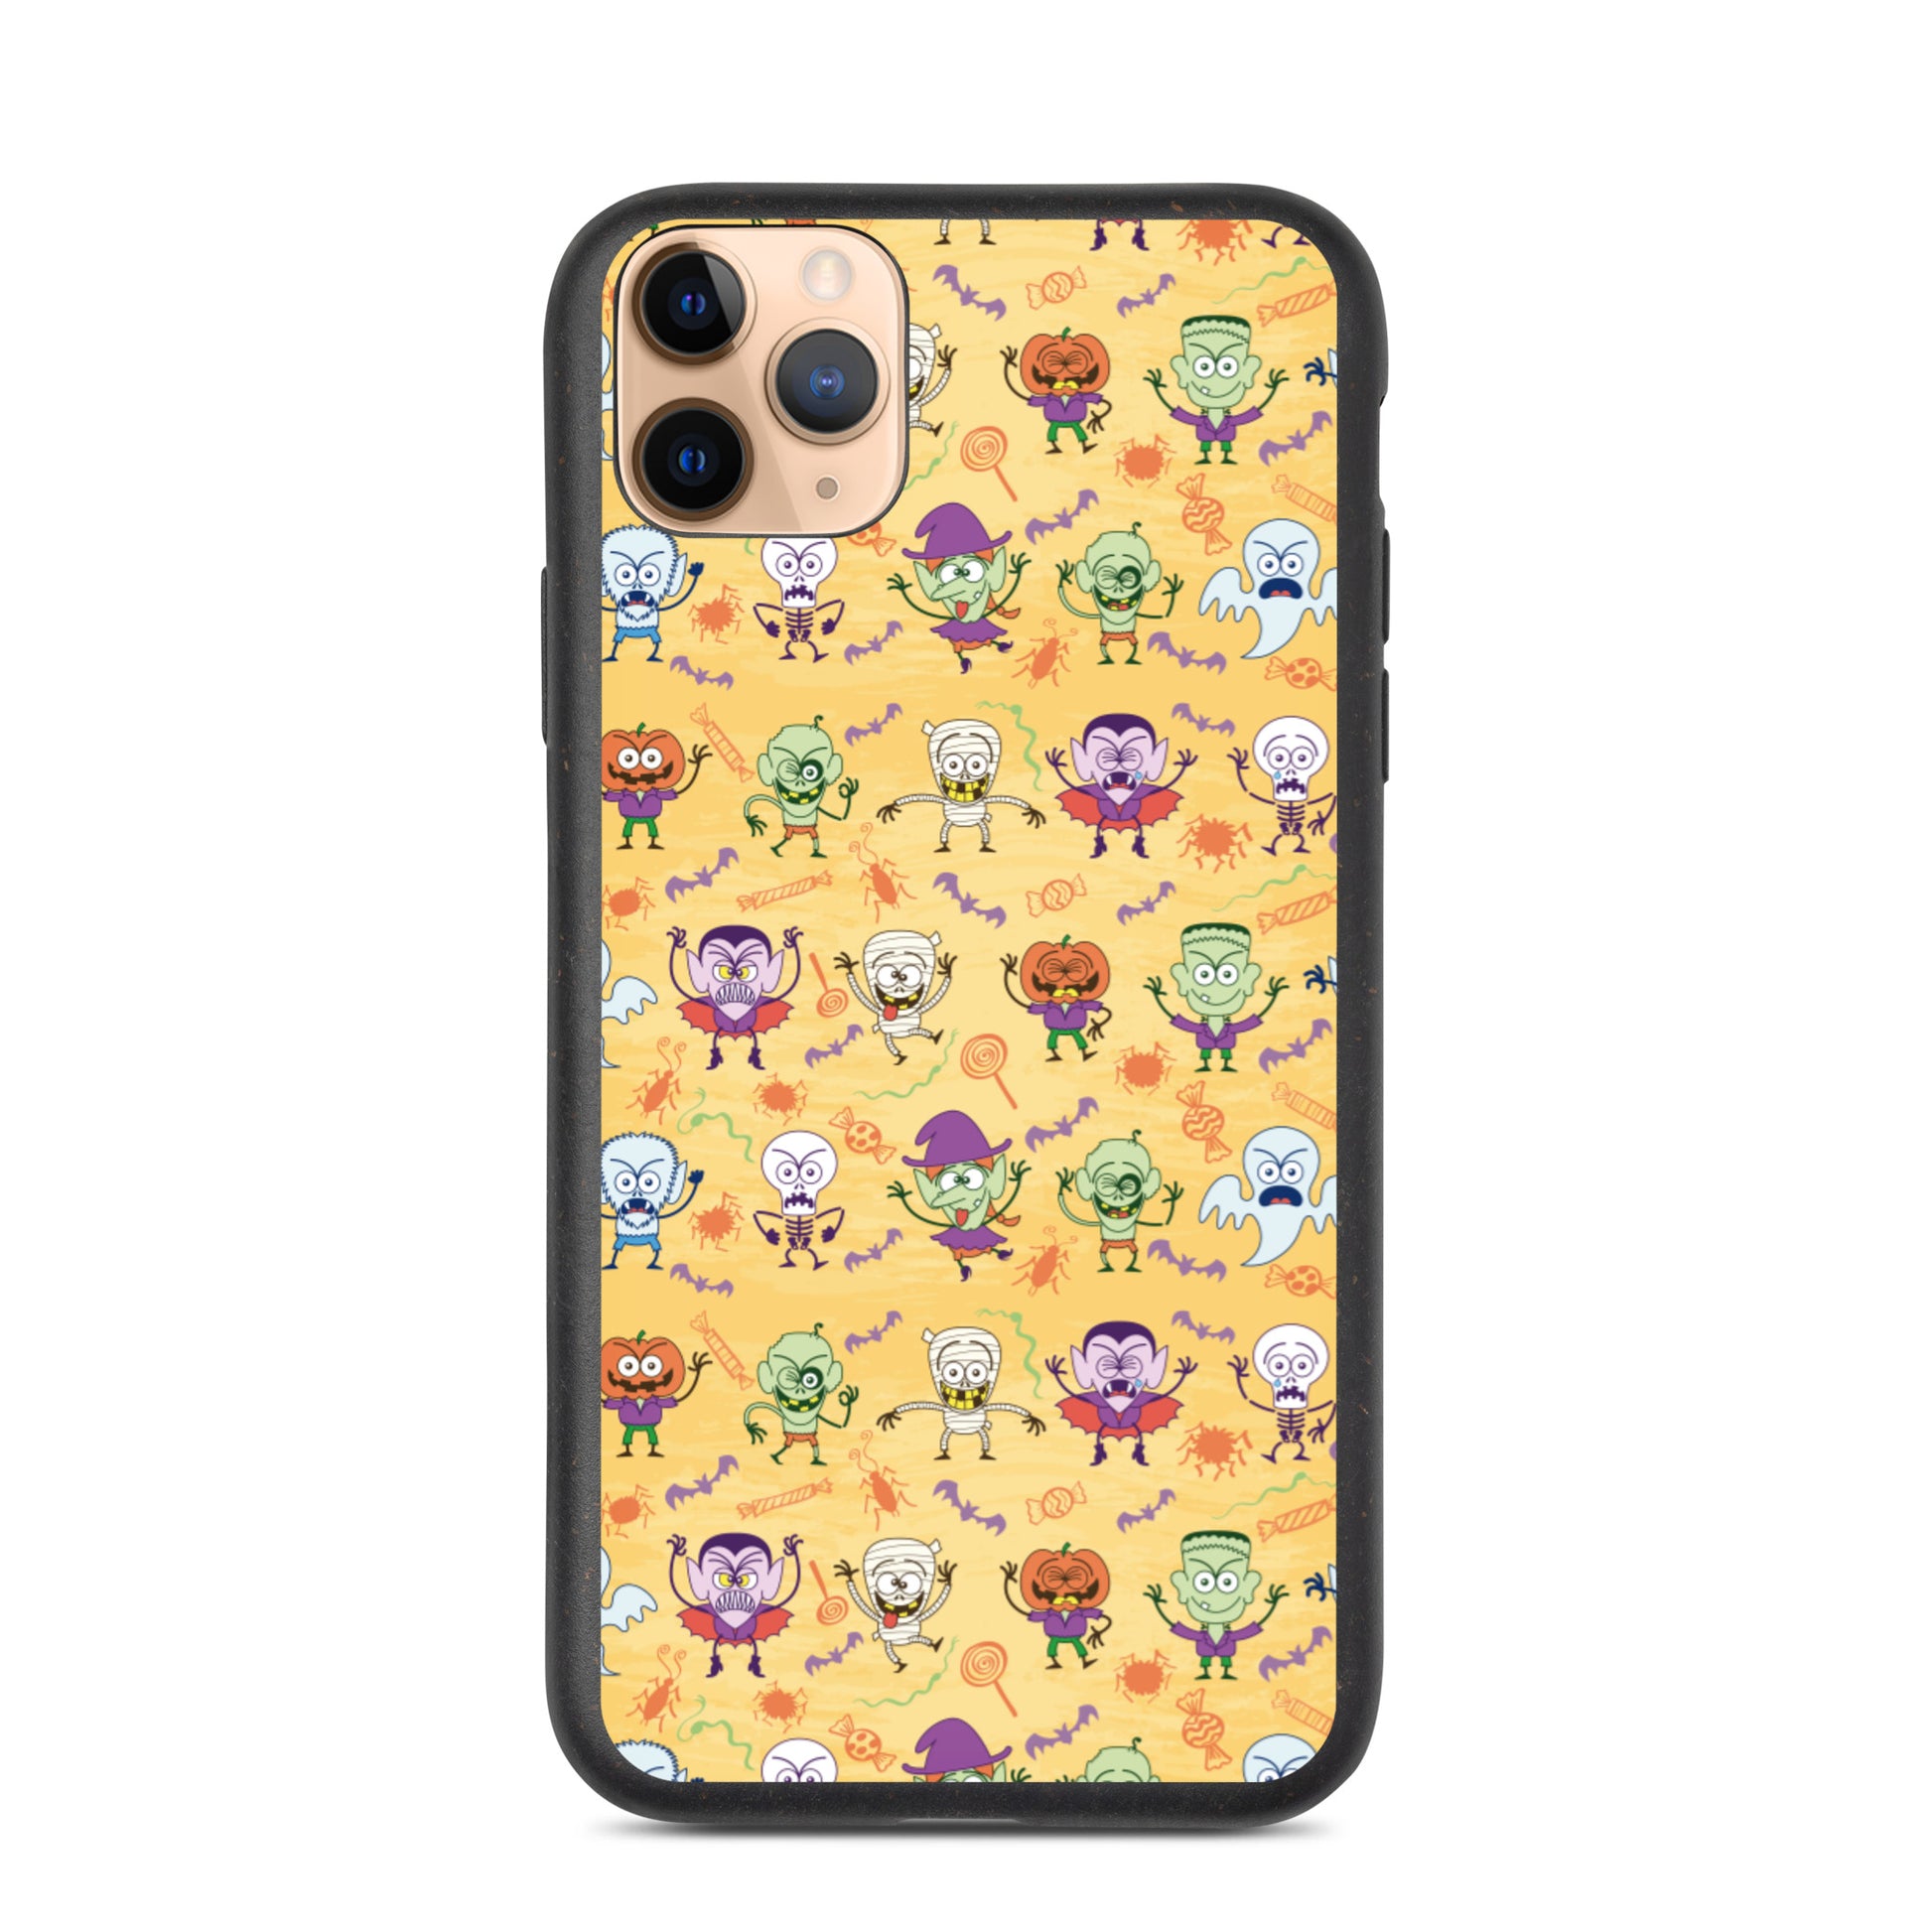 Halloween characters making funny faces Speckled iPhone case. IPhone 11 pro max